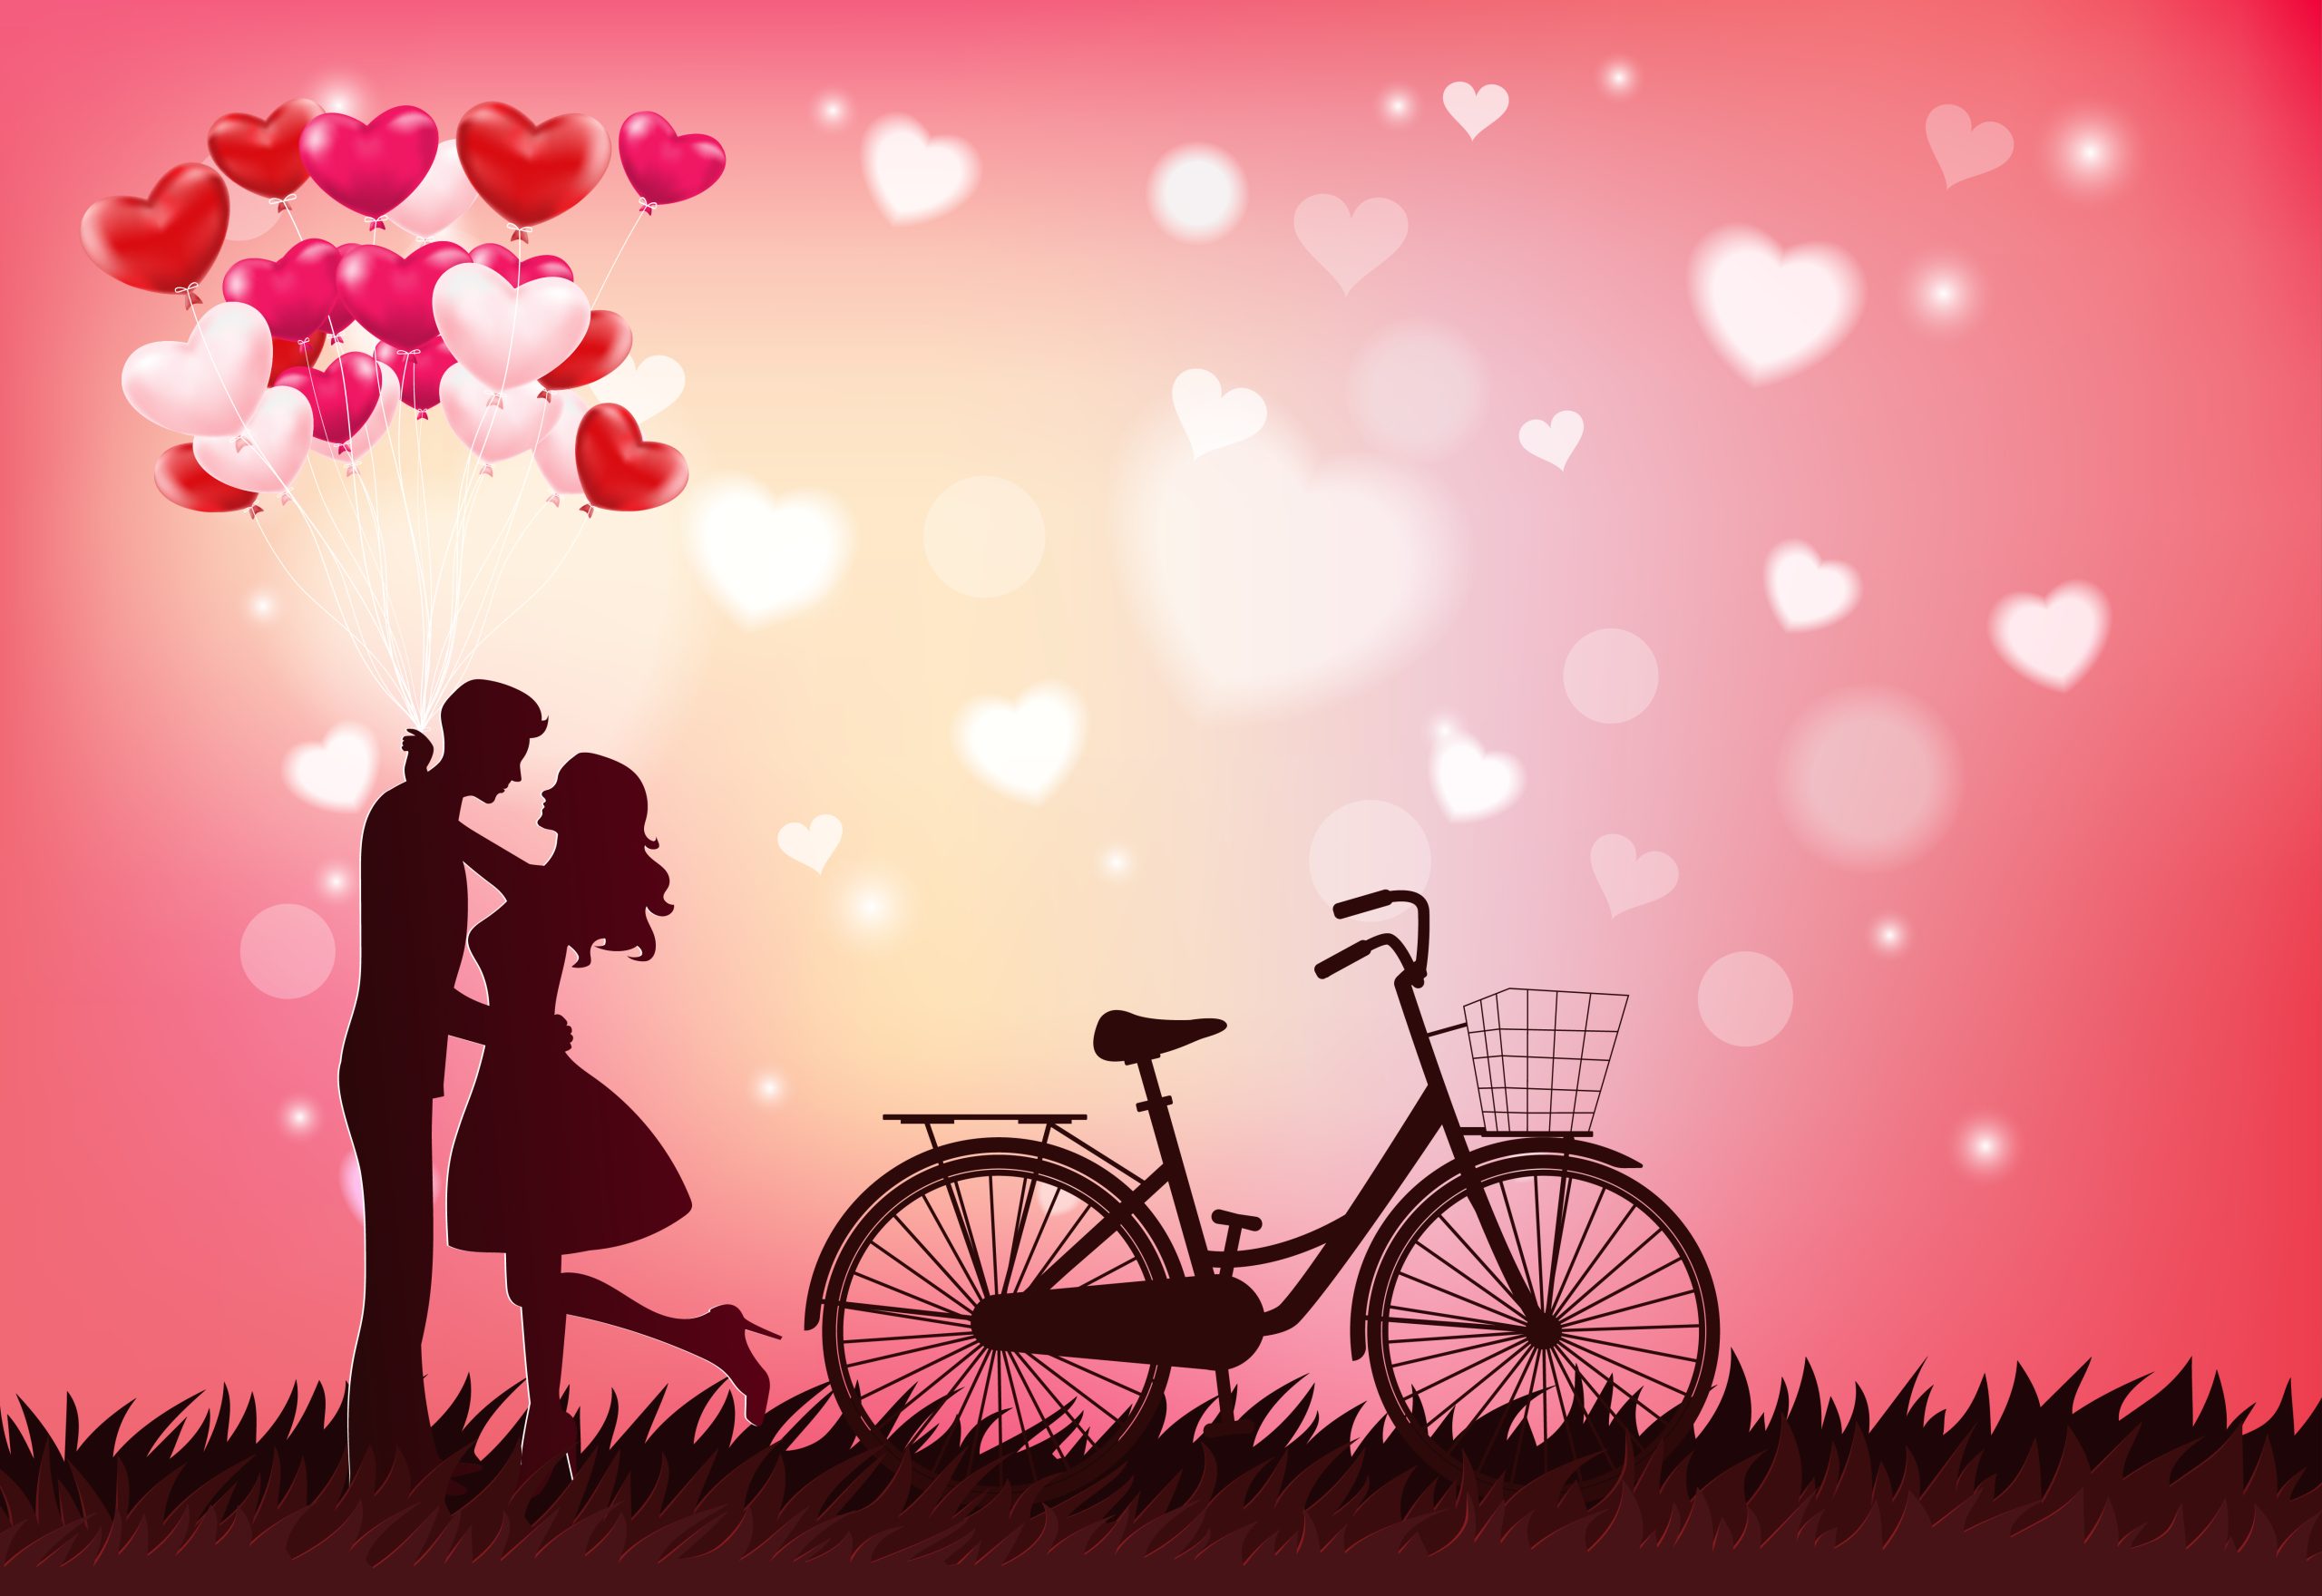 Flying Heart Cute Couple with Love expression – Happy Valentine’s Day